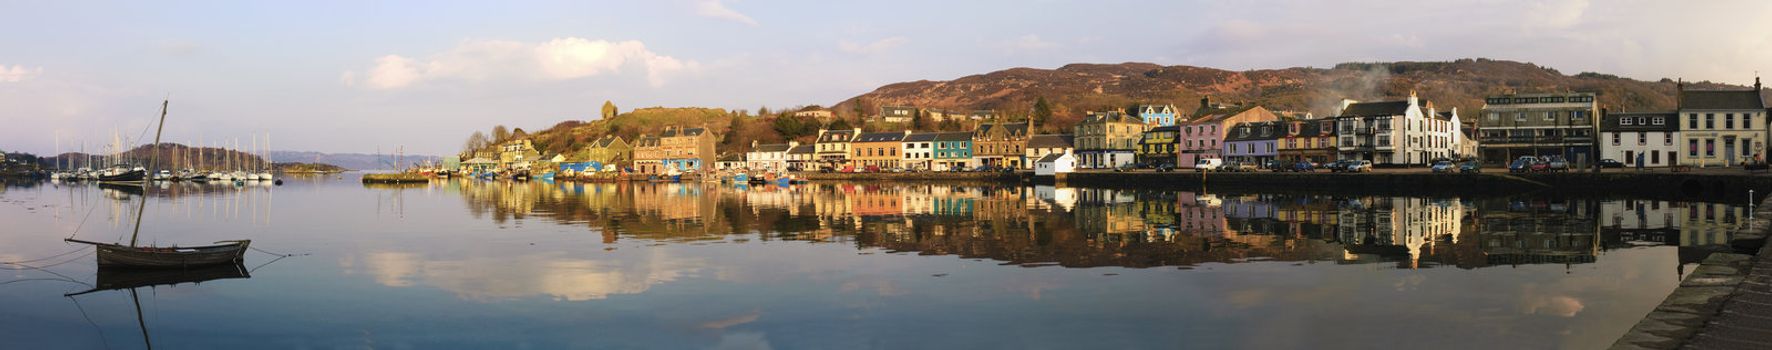 Panorama of Loch Fyne, Bruce's castle and Tarbert Harbor in Scotland at sunset